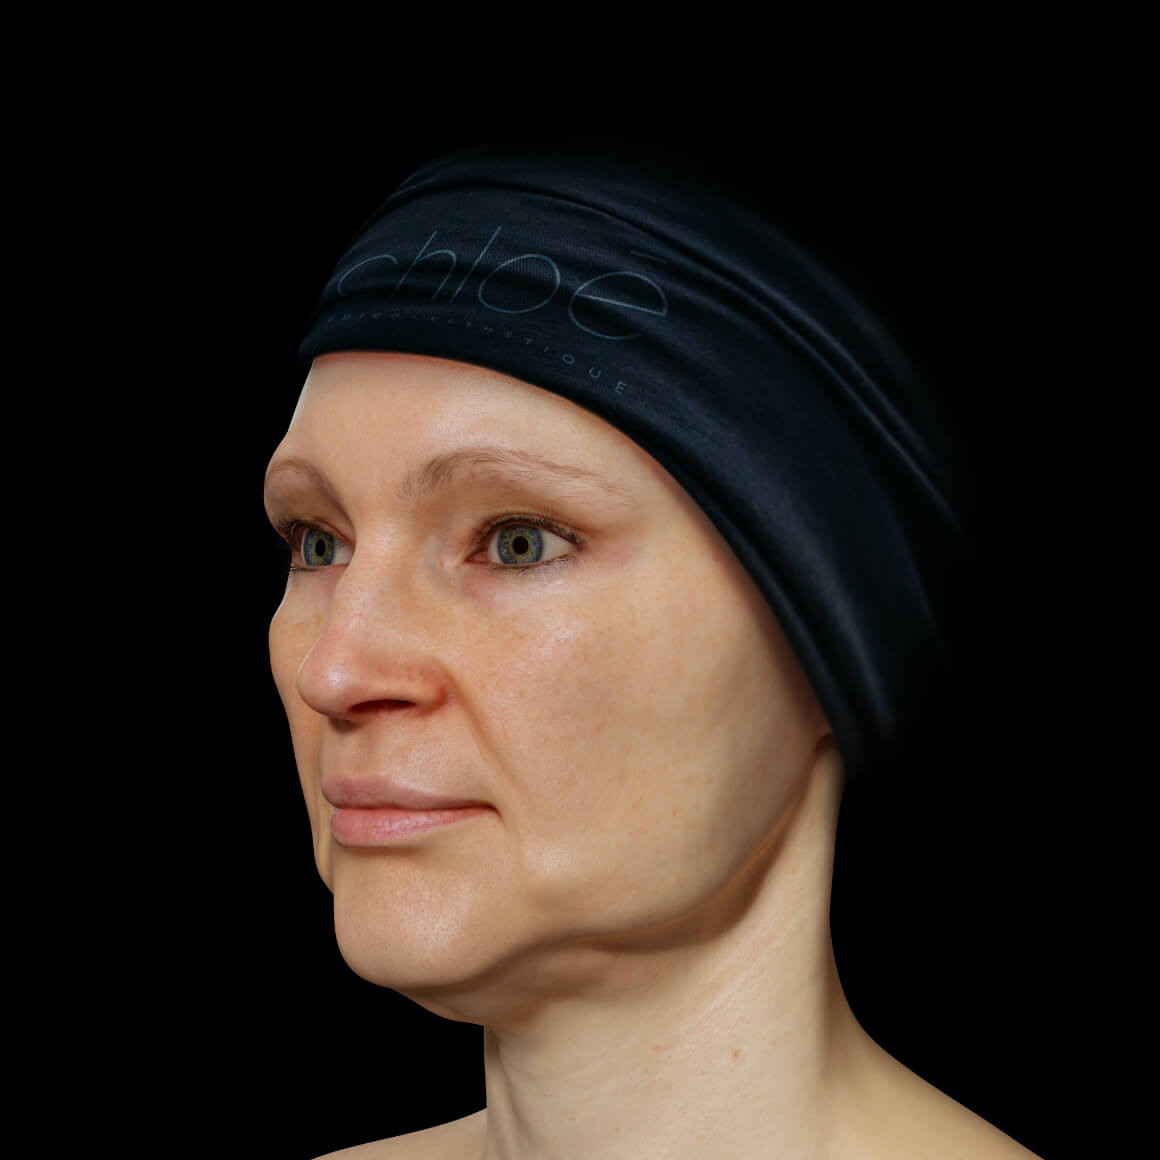 Clinique Chloé female patient positioned at an angle with sagging in the jawline area